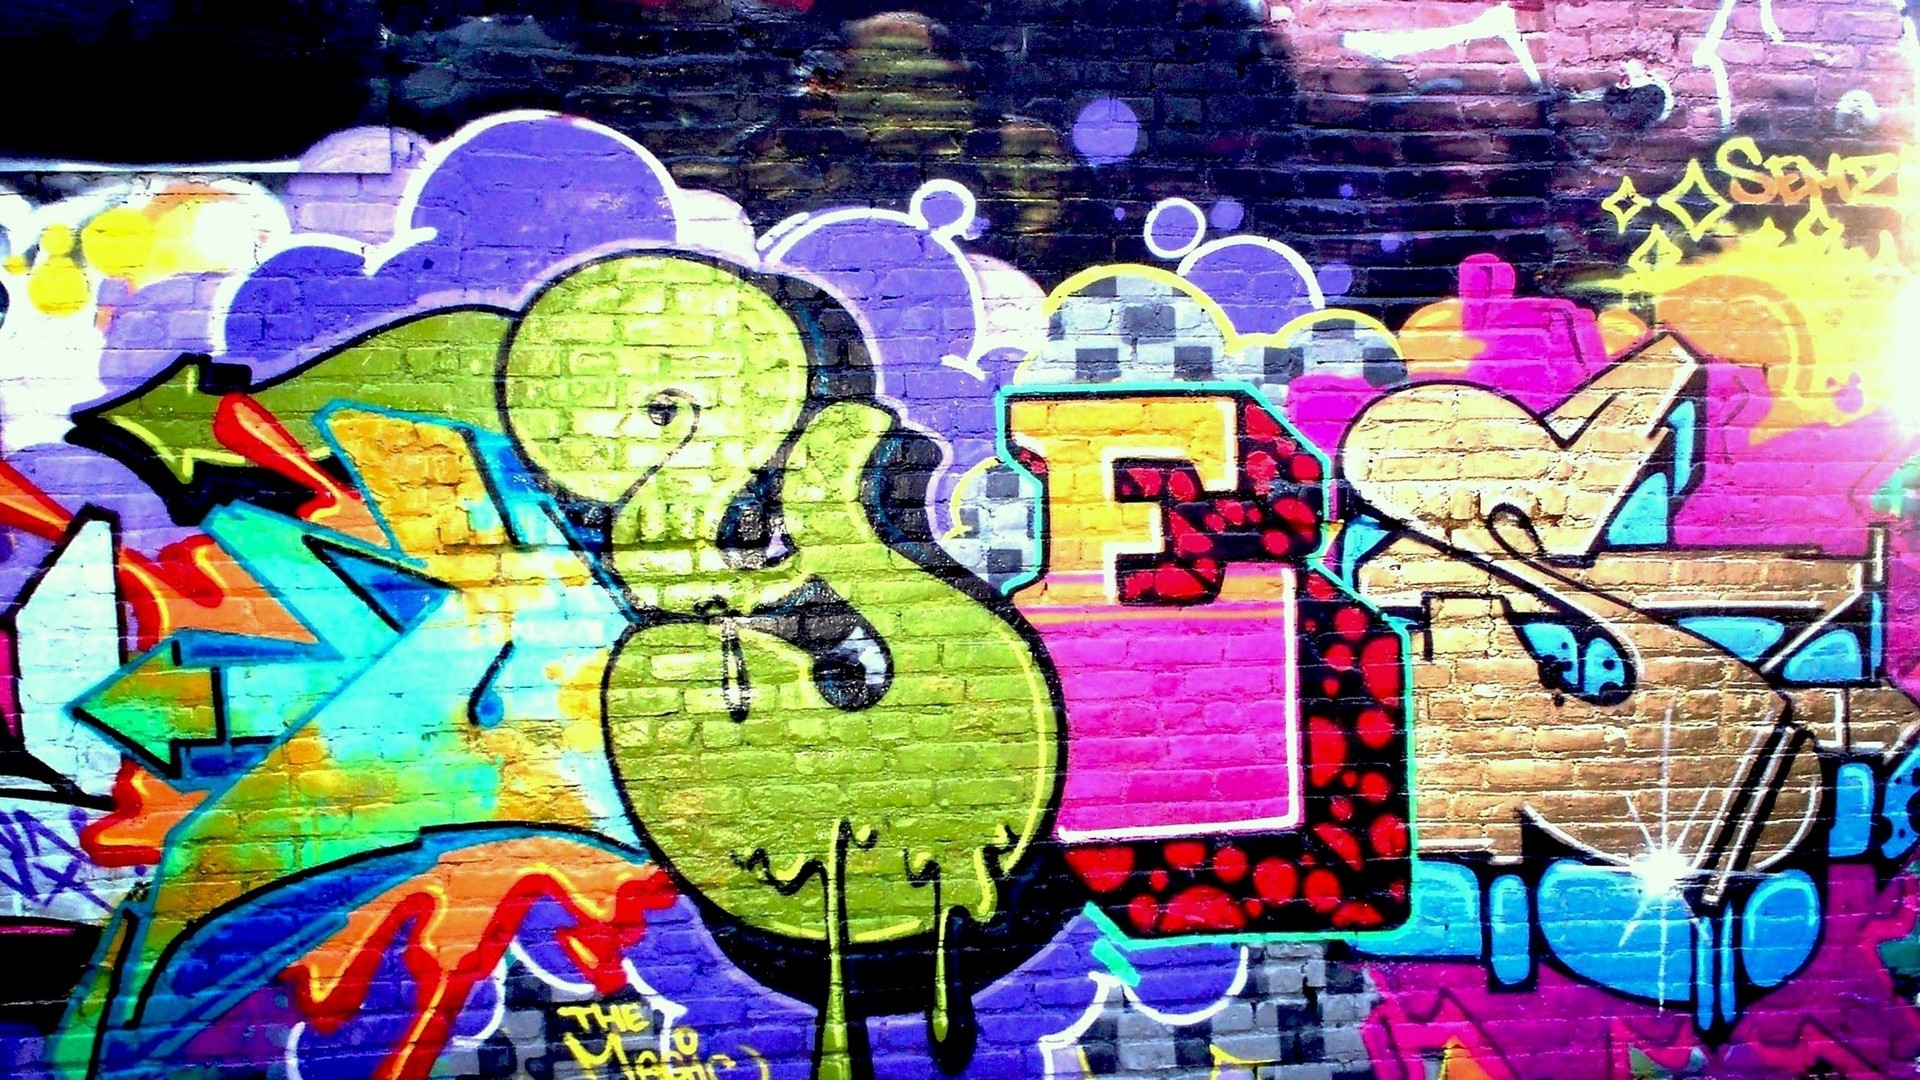 Graffiti Wall Wallpaper For Desktop with resolution 1920X1080 pixel. You can use this wallpaper as background for your desktop Computer Screensavers, Android or iPhone smartphones